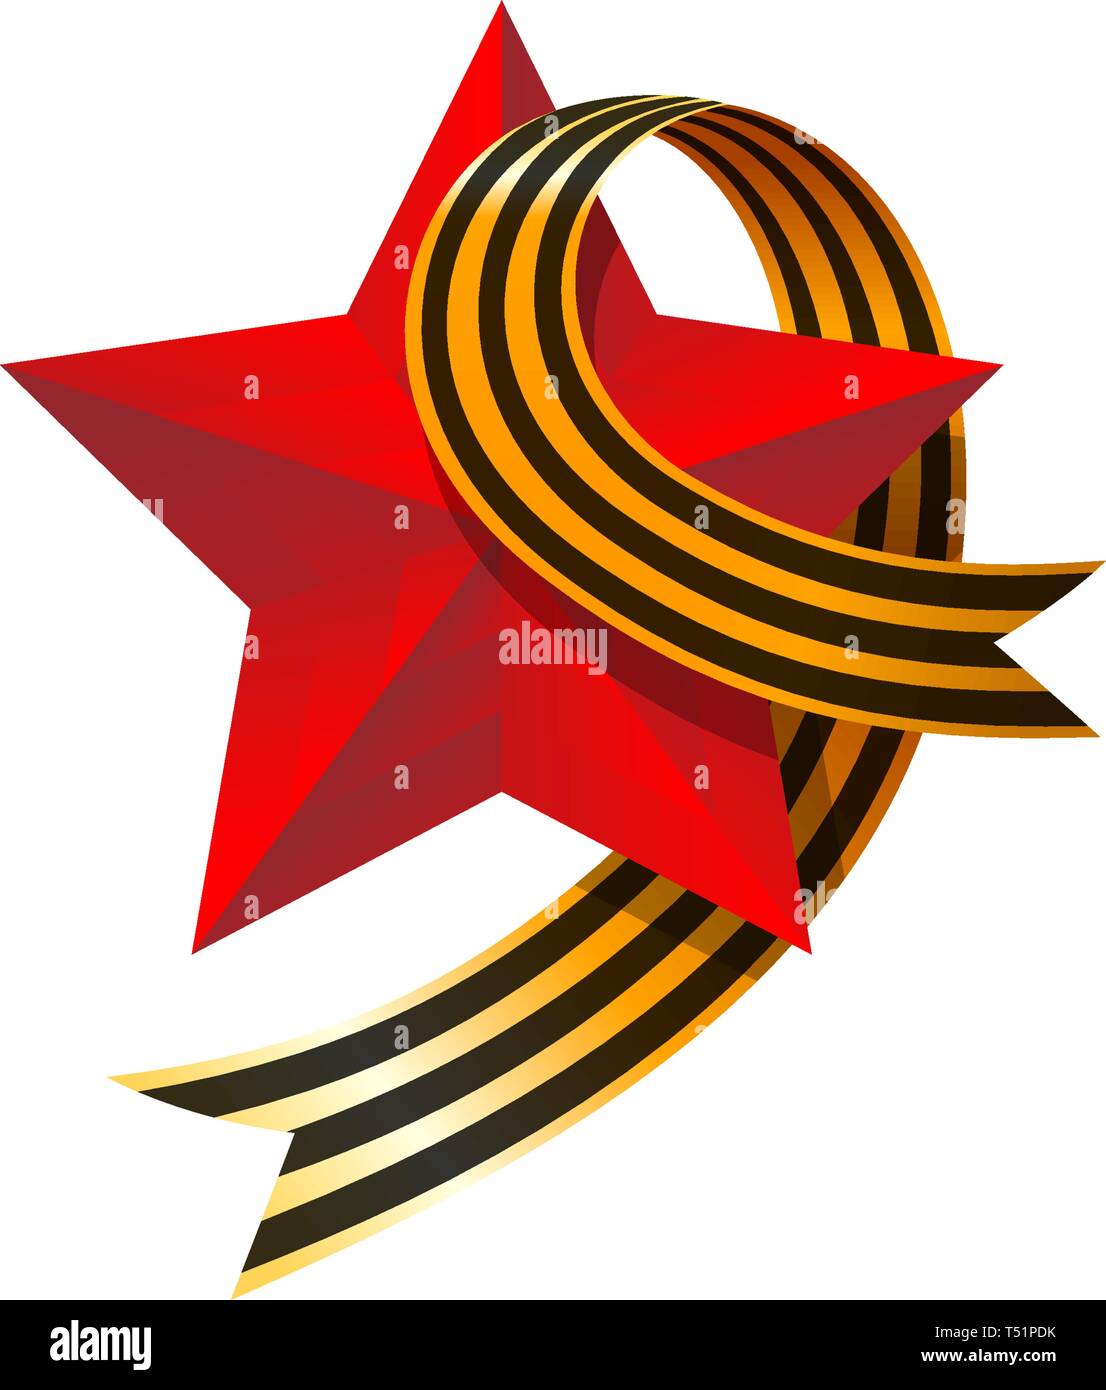 May 9 Russian holiday Great Victory day. Big red star and carnation. Symbol of victory Soviet Union over Nazi Germany in World War II. Vector illustra Stock Vector